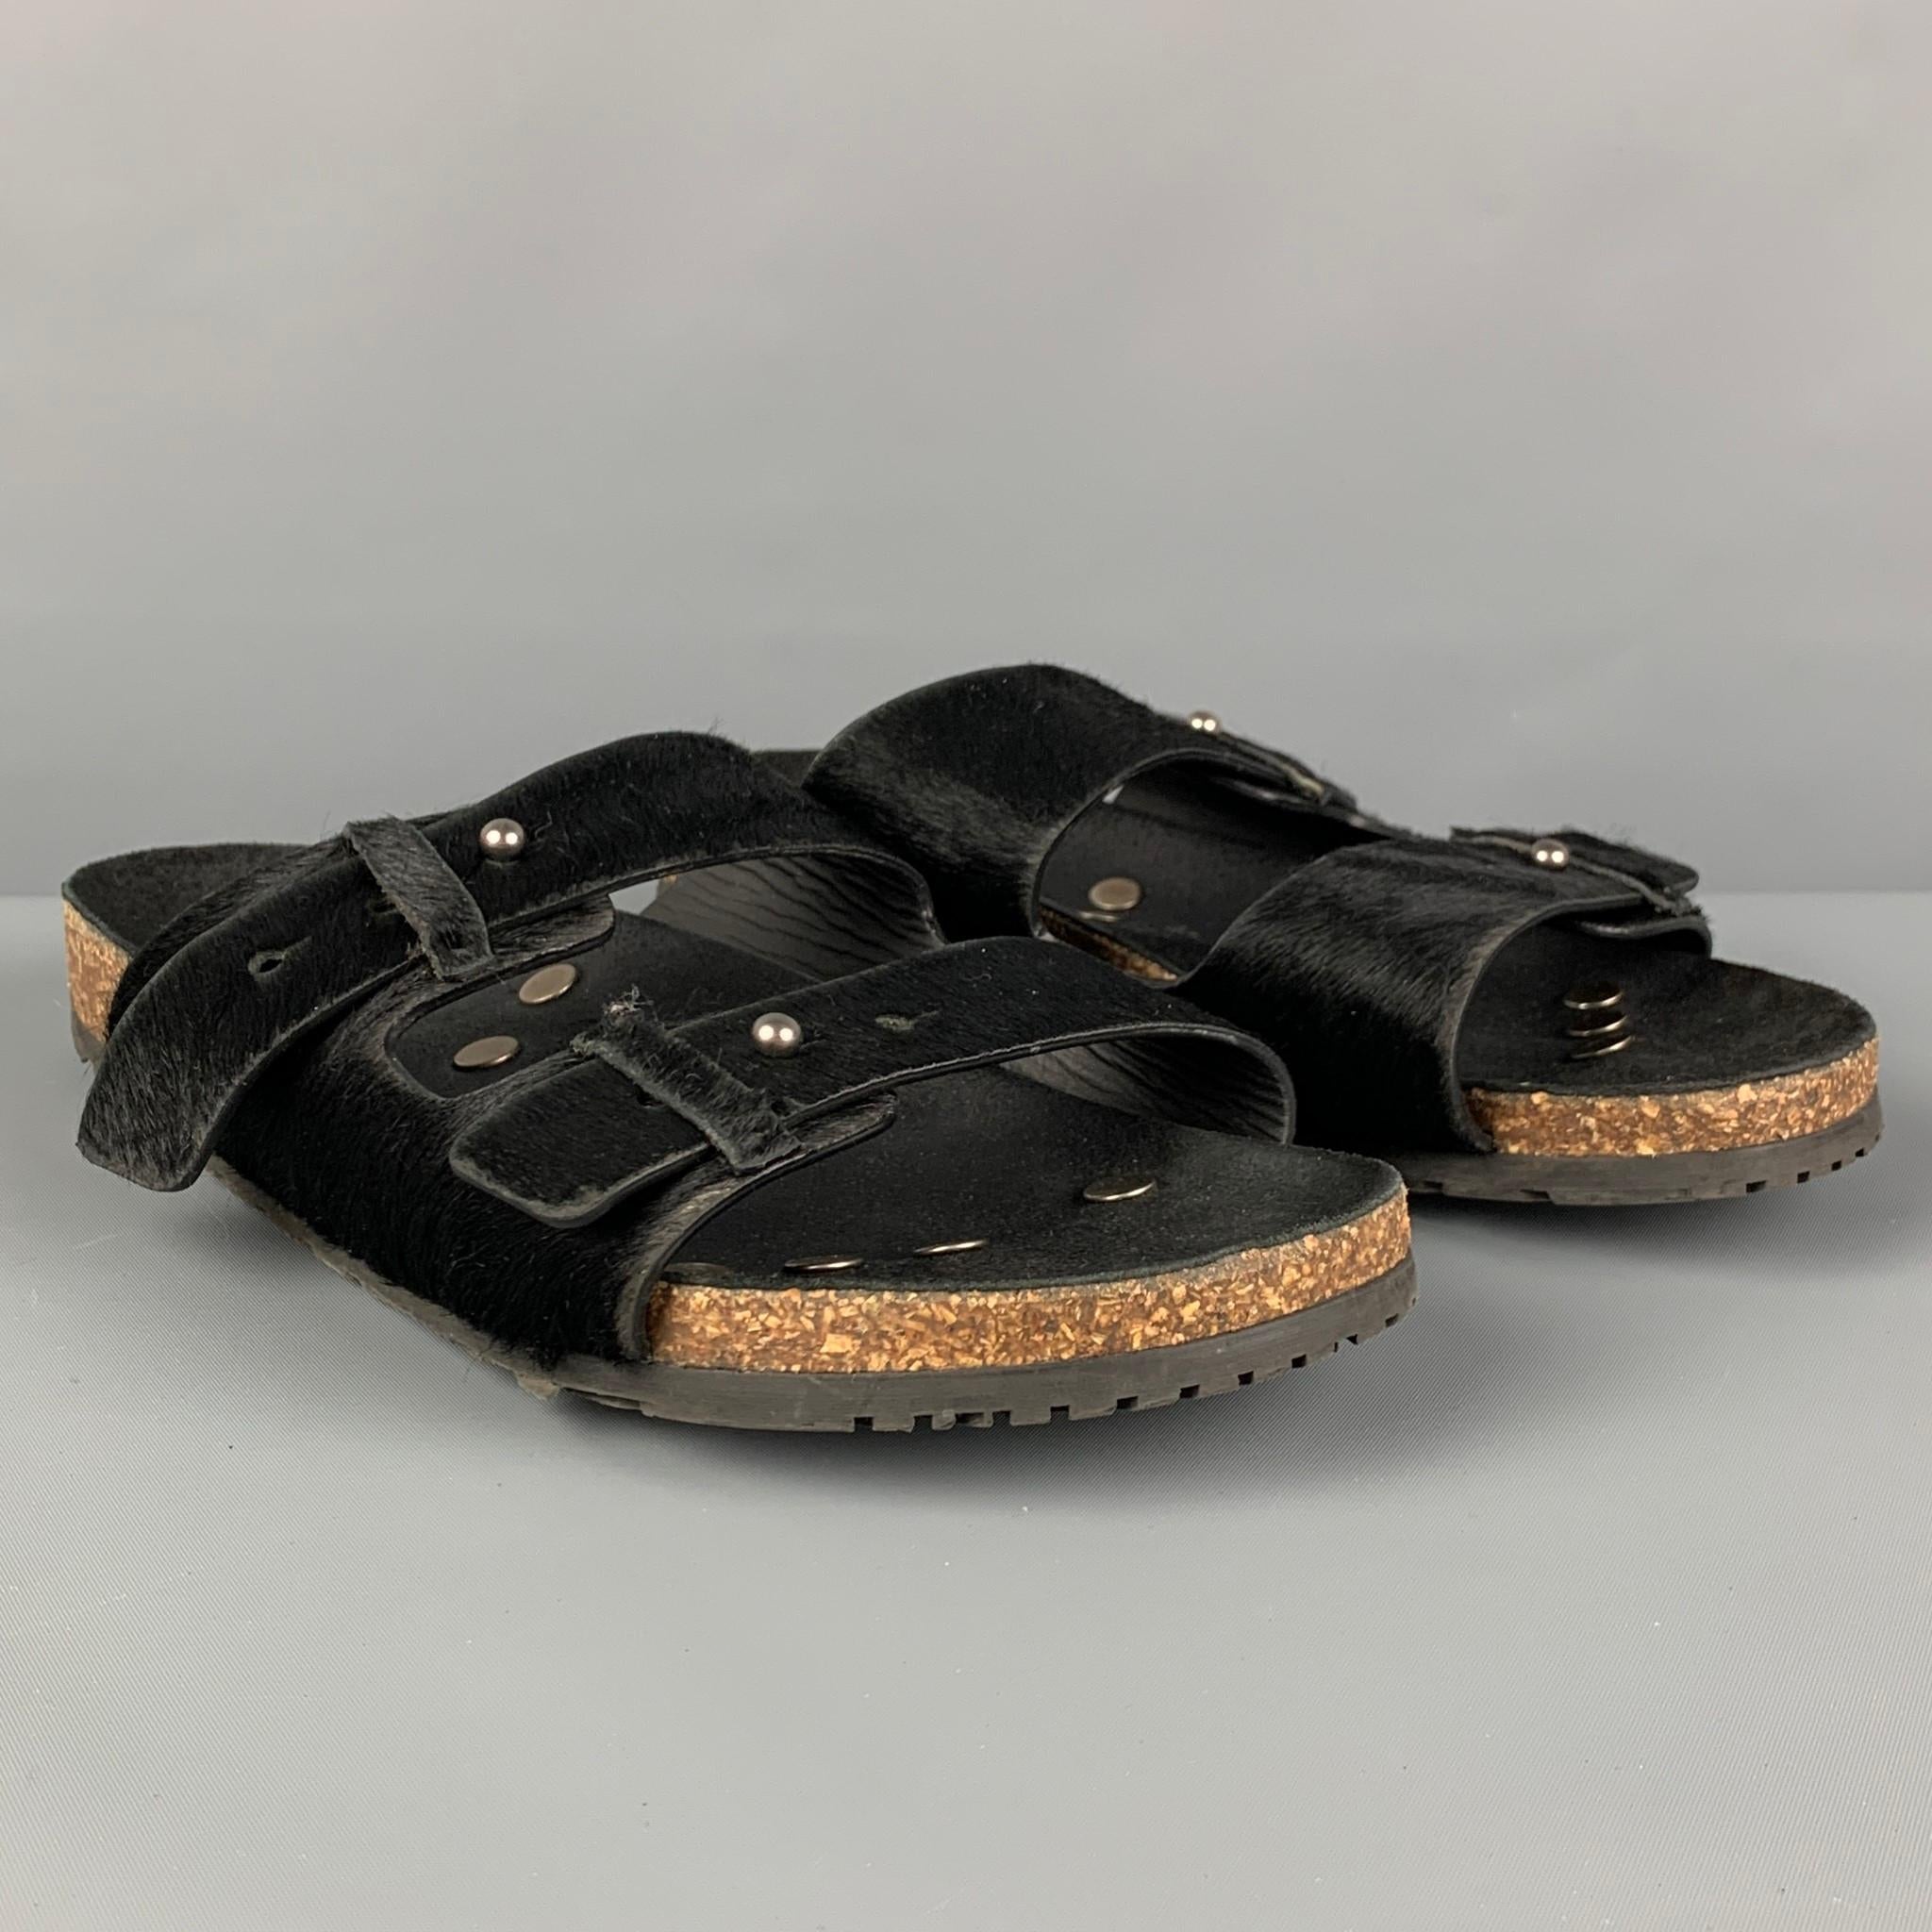 SAINT LAURENT sandals comes in a black textured pony hair leather featuring adjustable straps and a rubber sole. Made in Italy.

Very Good Pre-Owned Condition.
Marked: 42

Outsole: 11 in. x 3.75 in. 